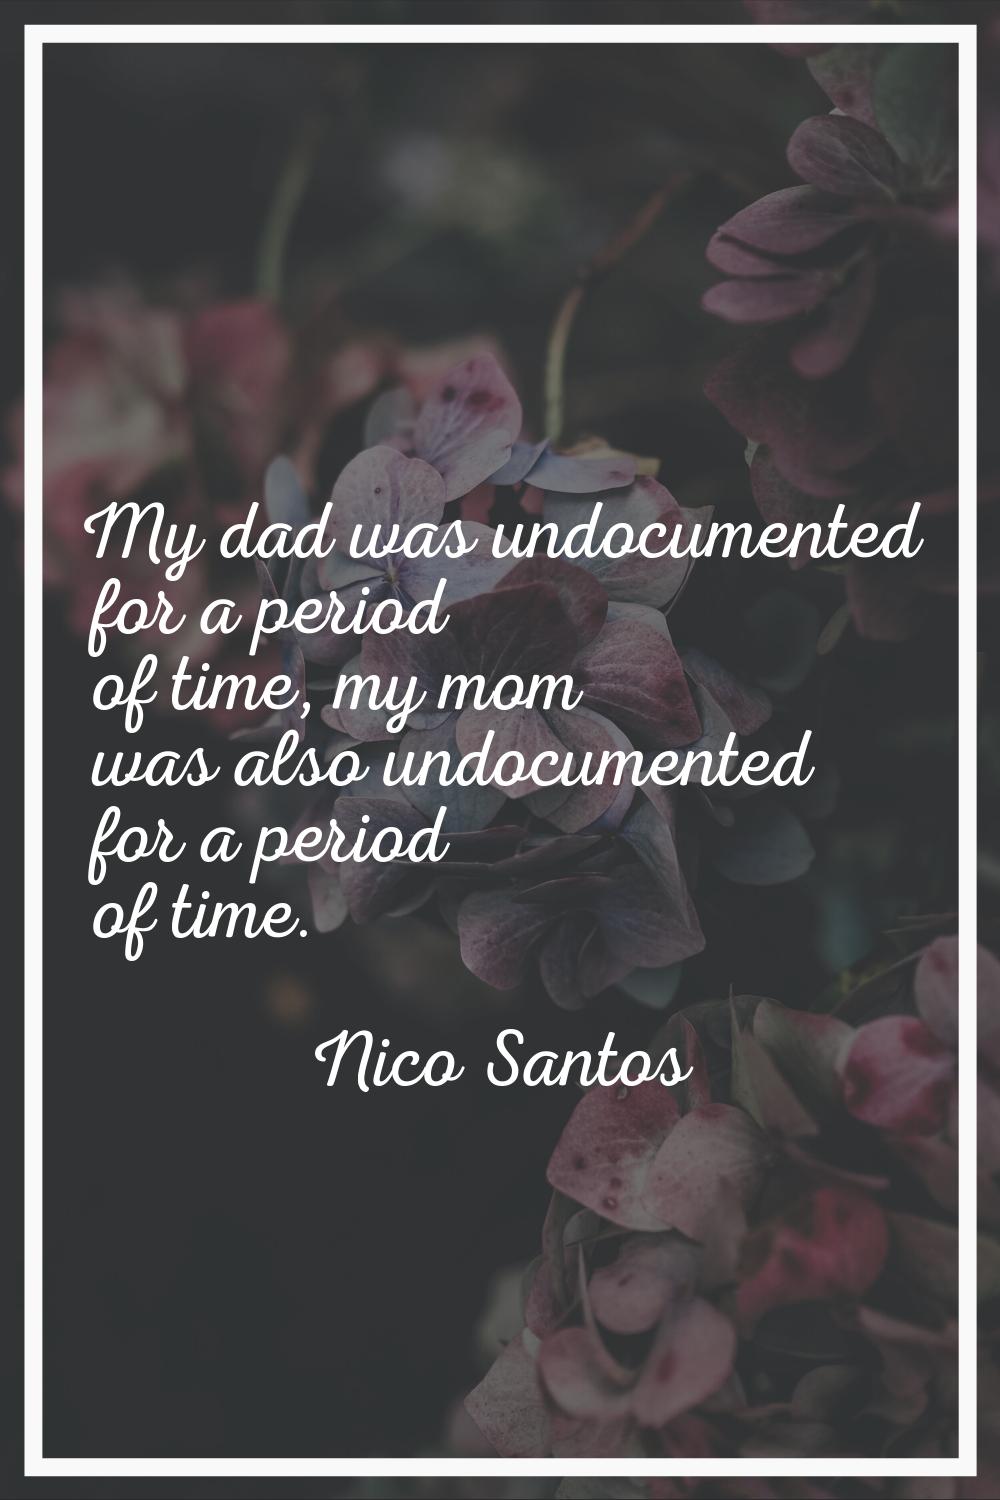 My dad was undocumented for a period of time, my mom was also undocumented for a period of time.